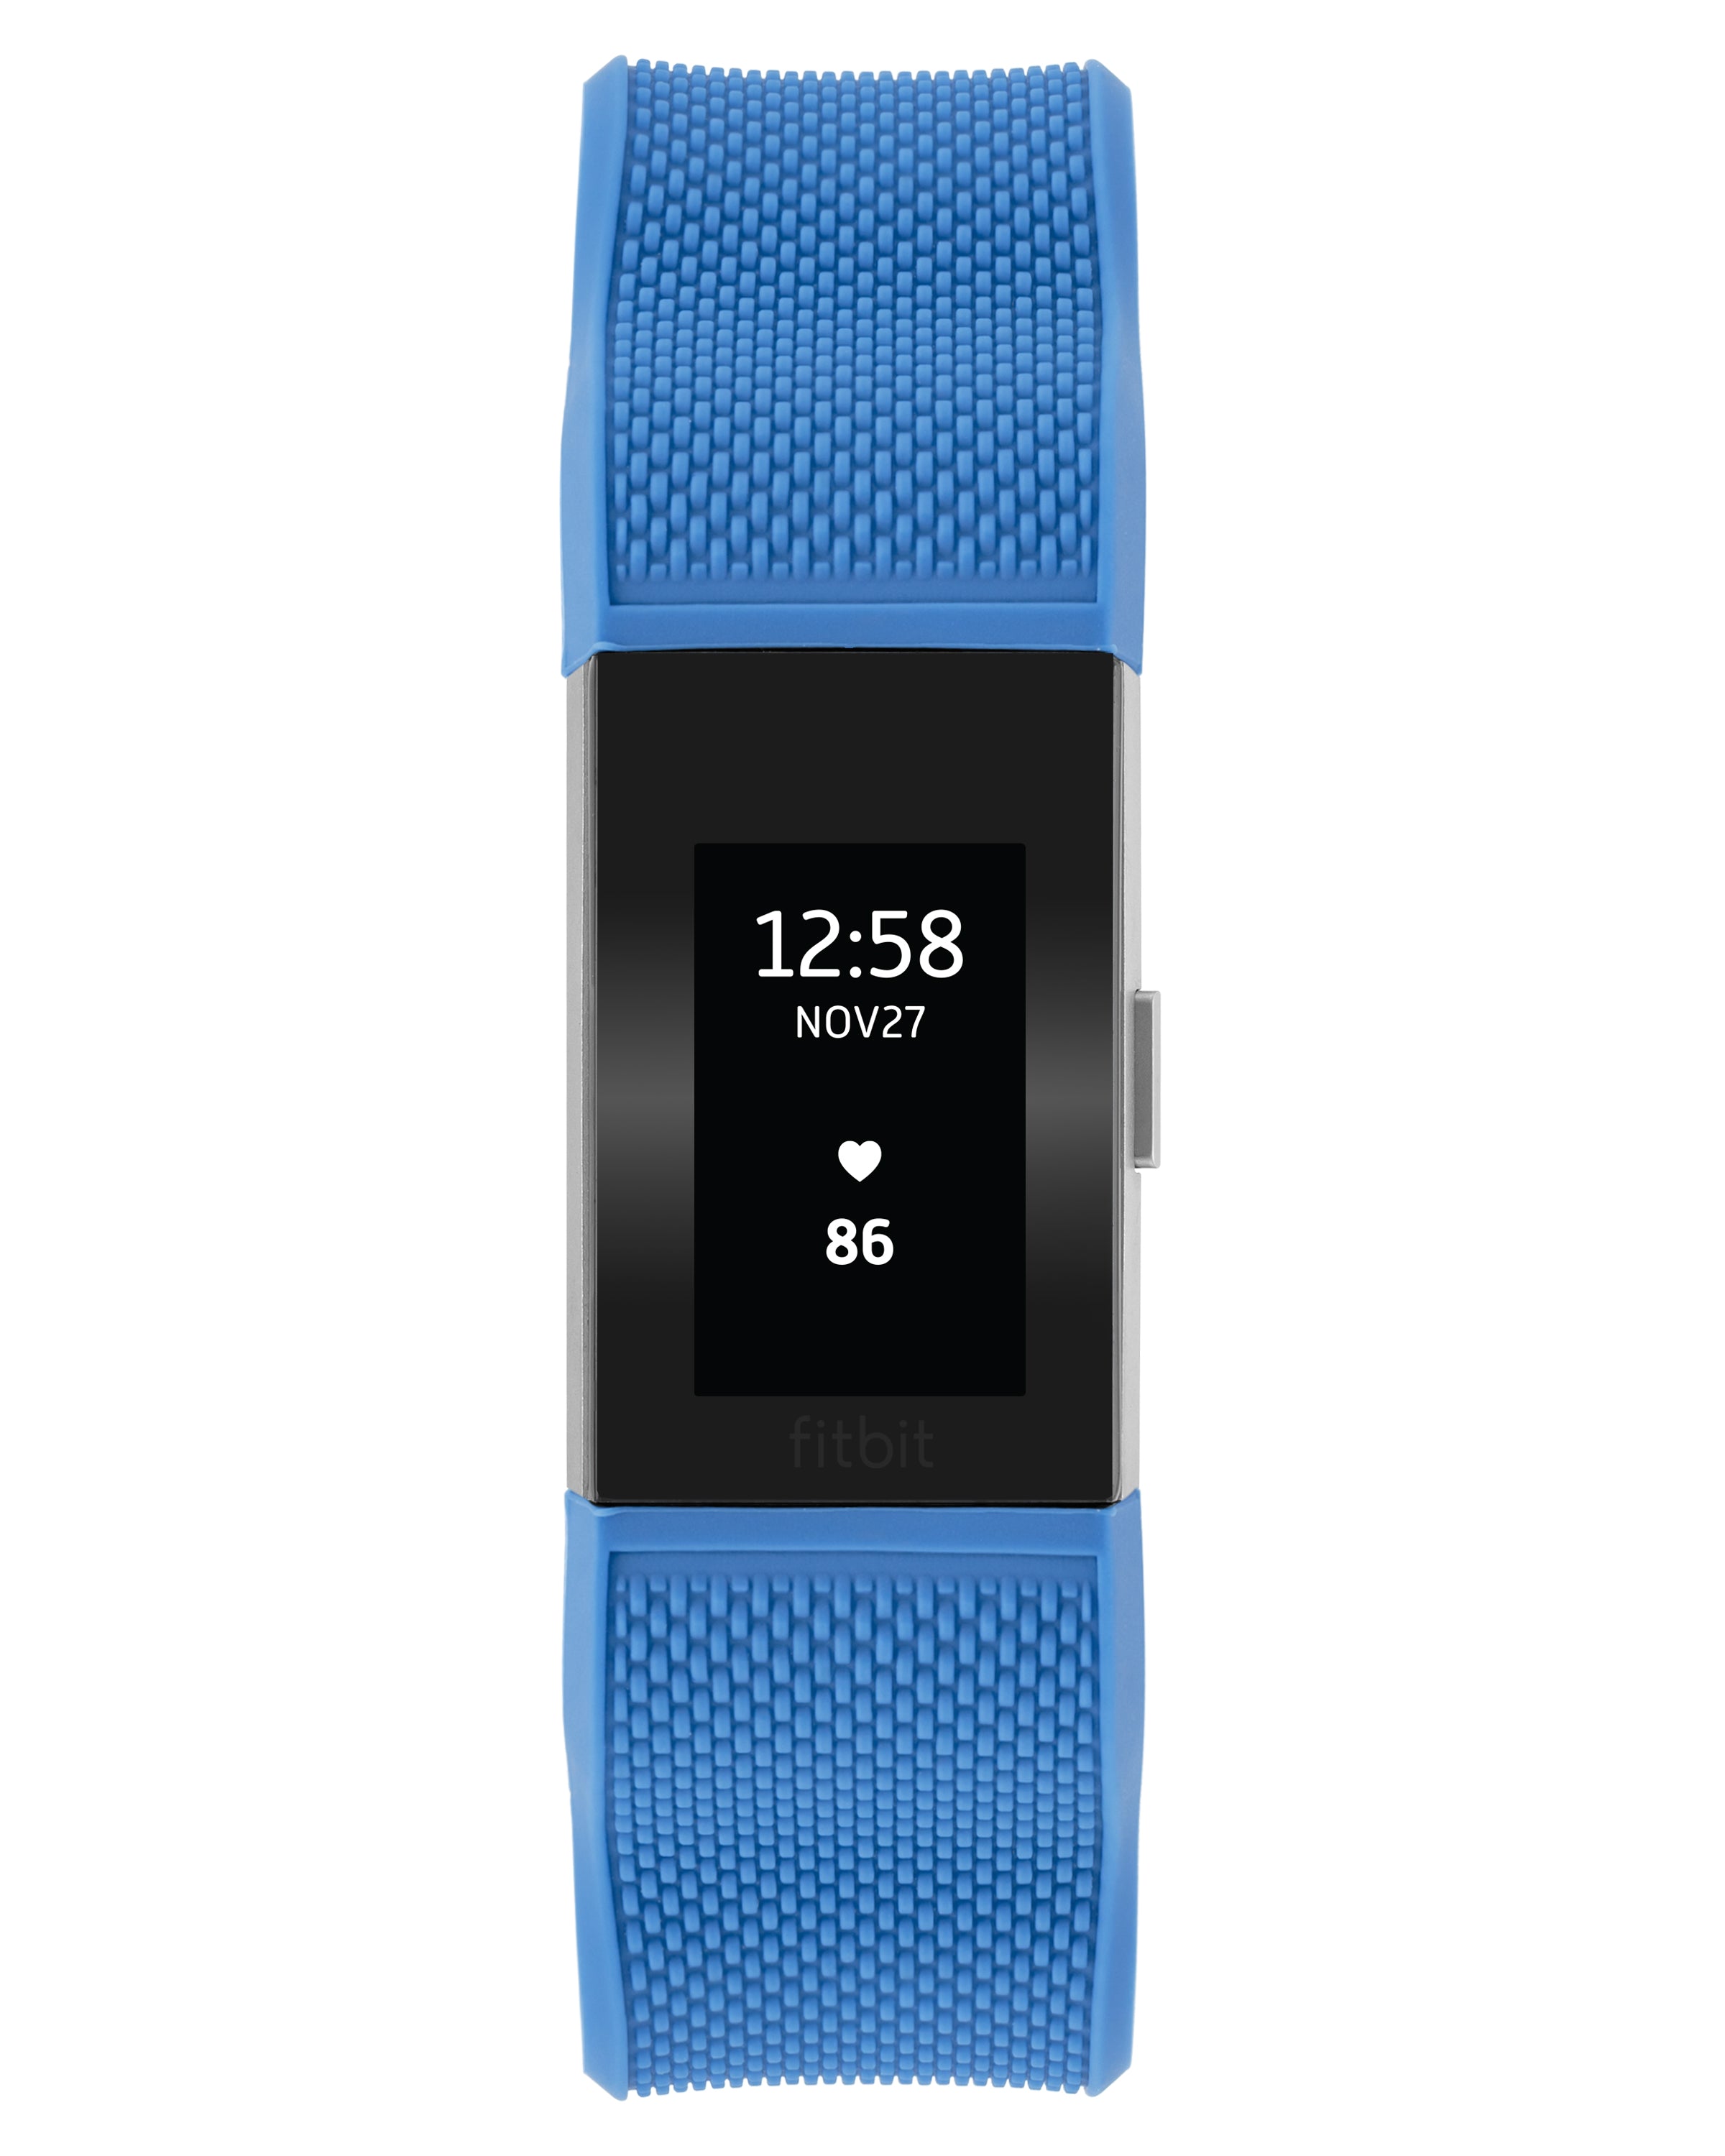 Silicone Woven Band for Fitbit Charge